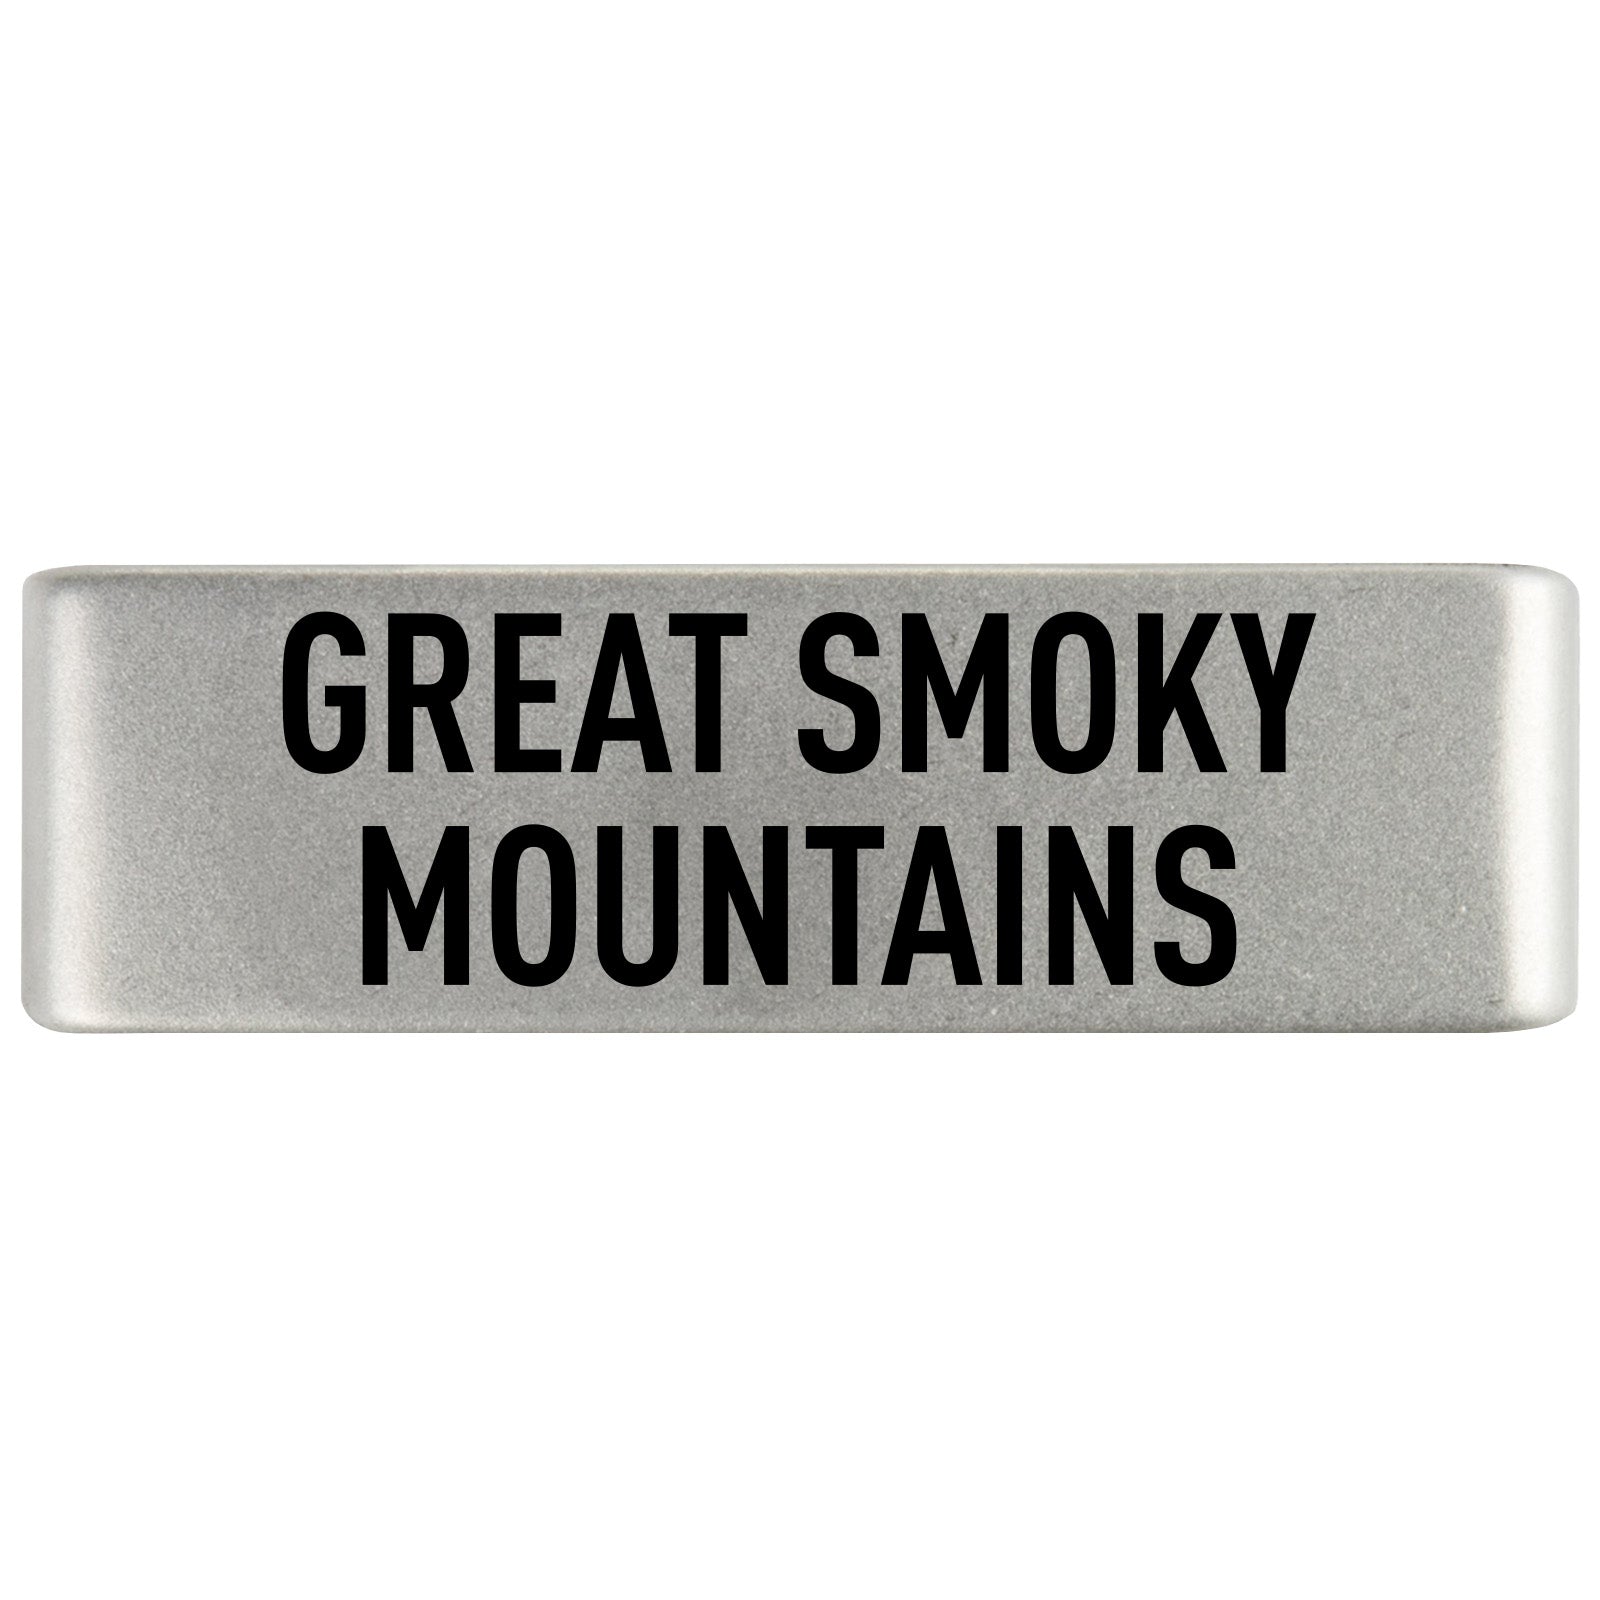 Great Smoky Mountains Badge Badge 19mm - ROAD iD